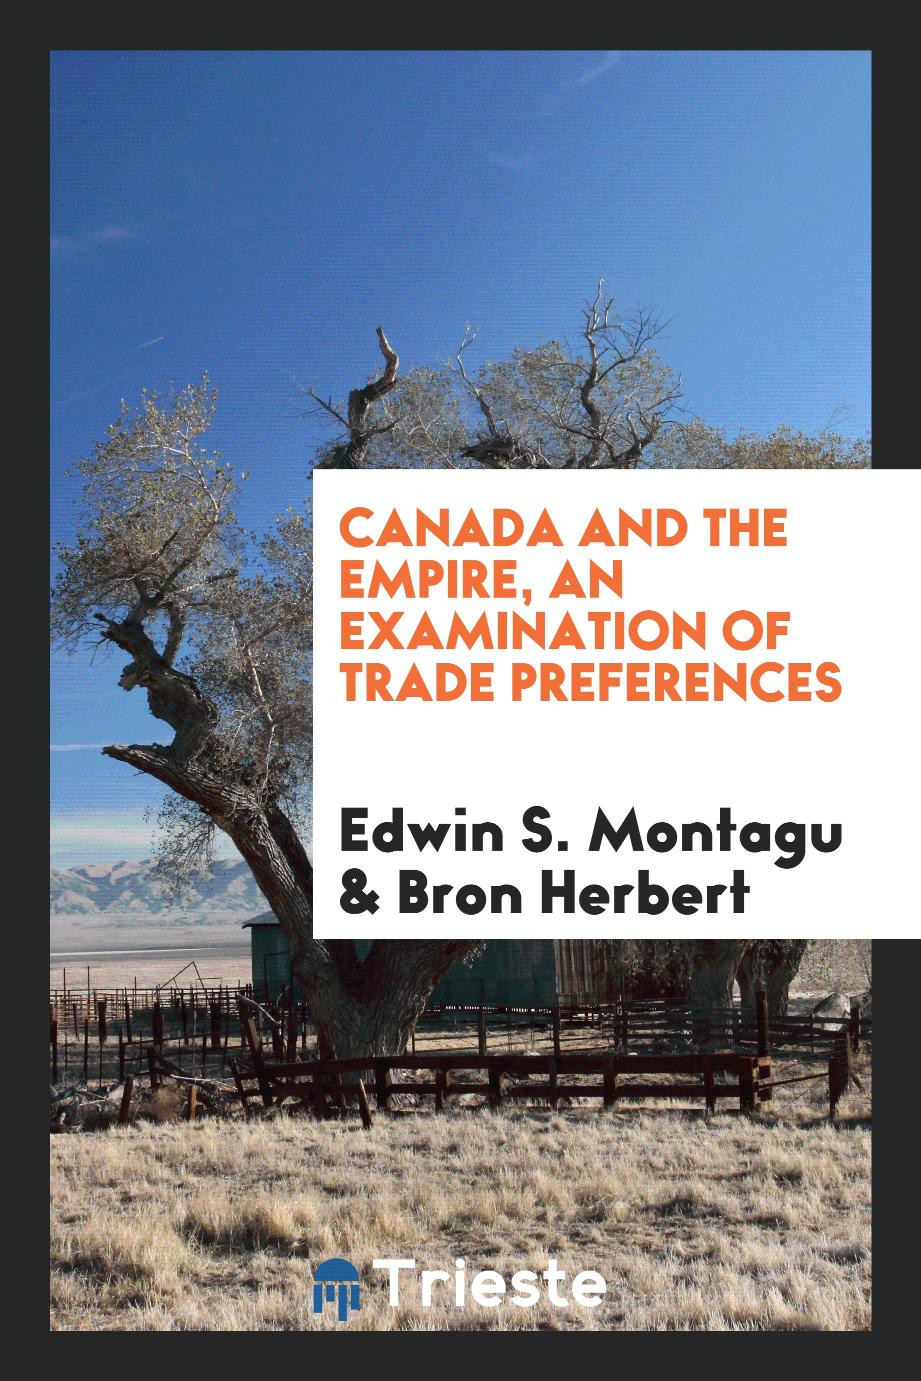 Canada and the Empire, an examination of trade preferences